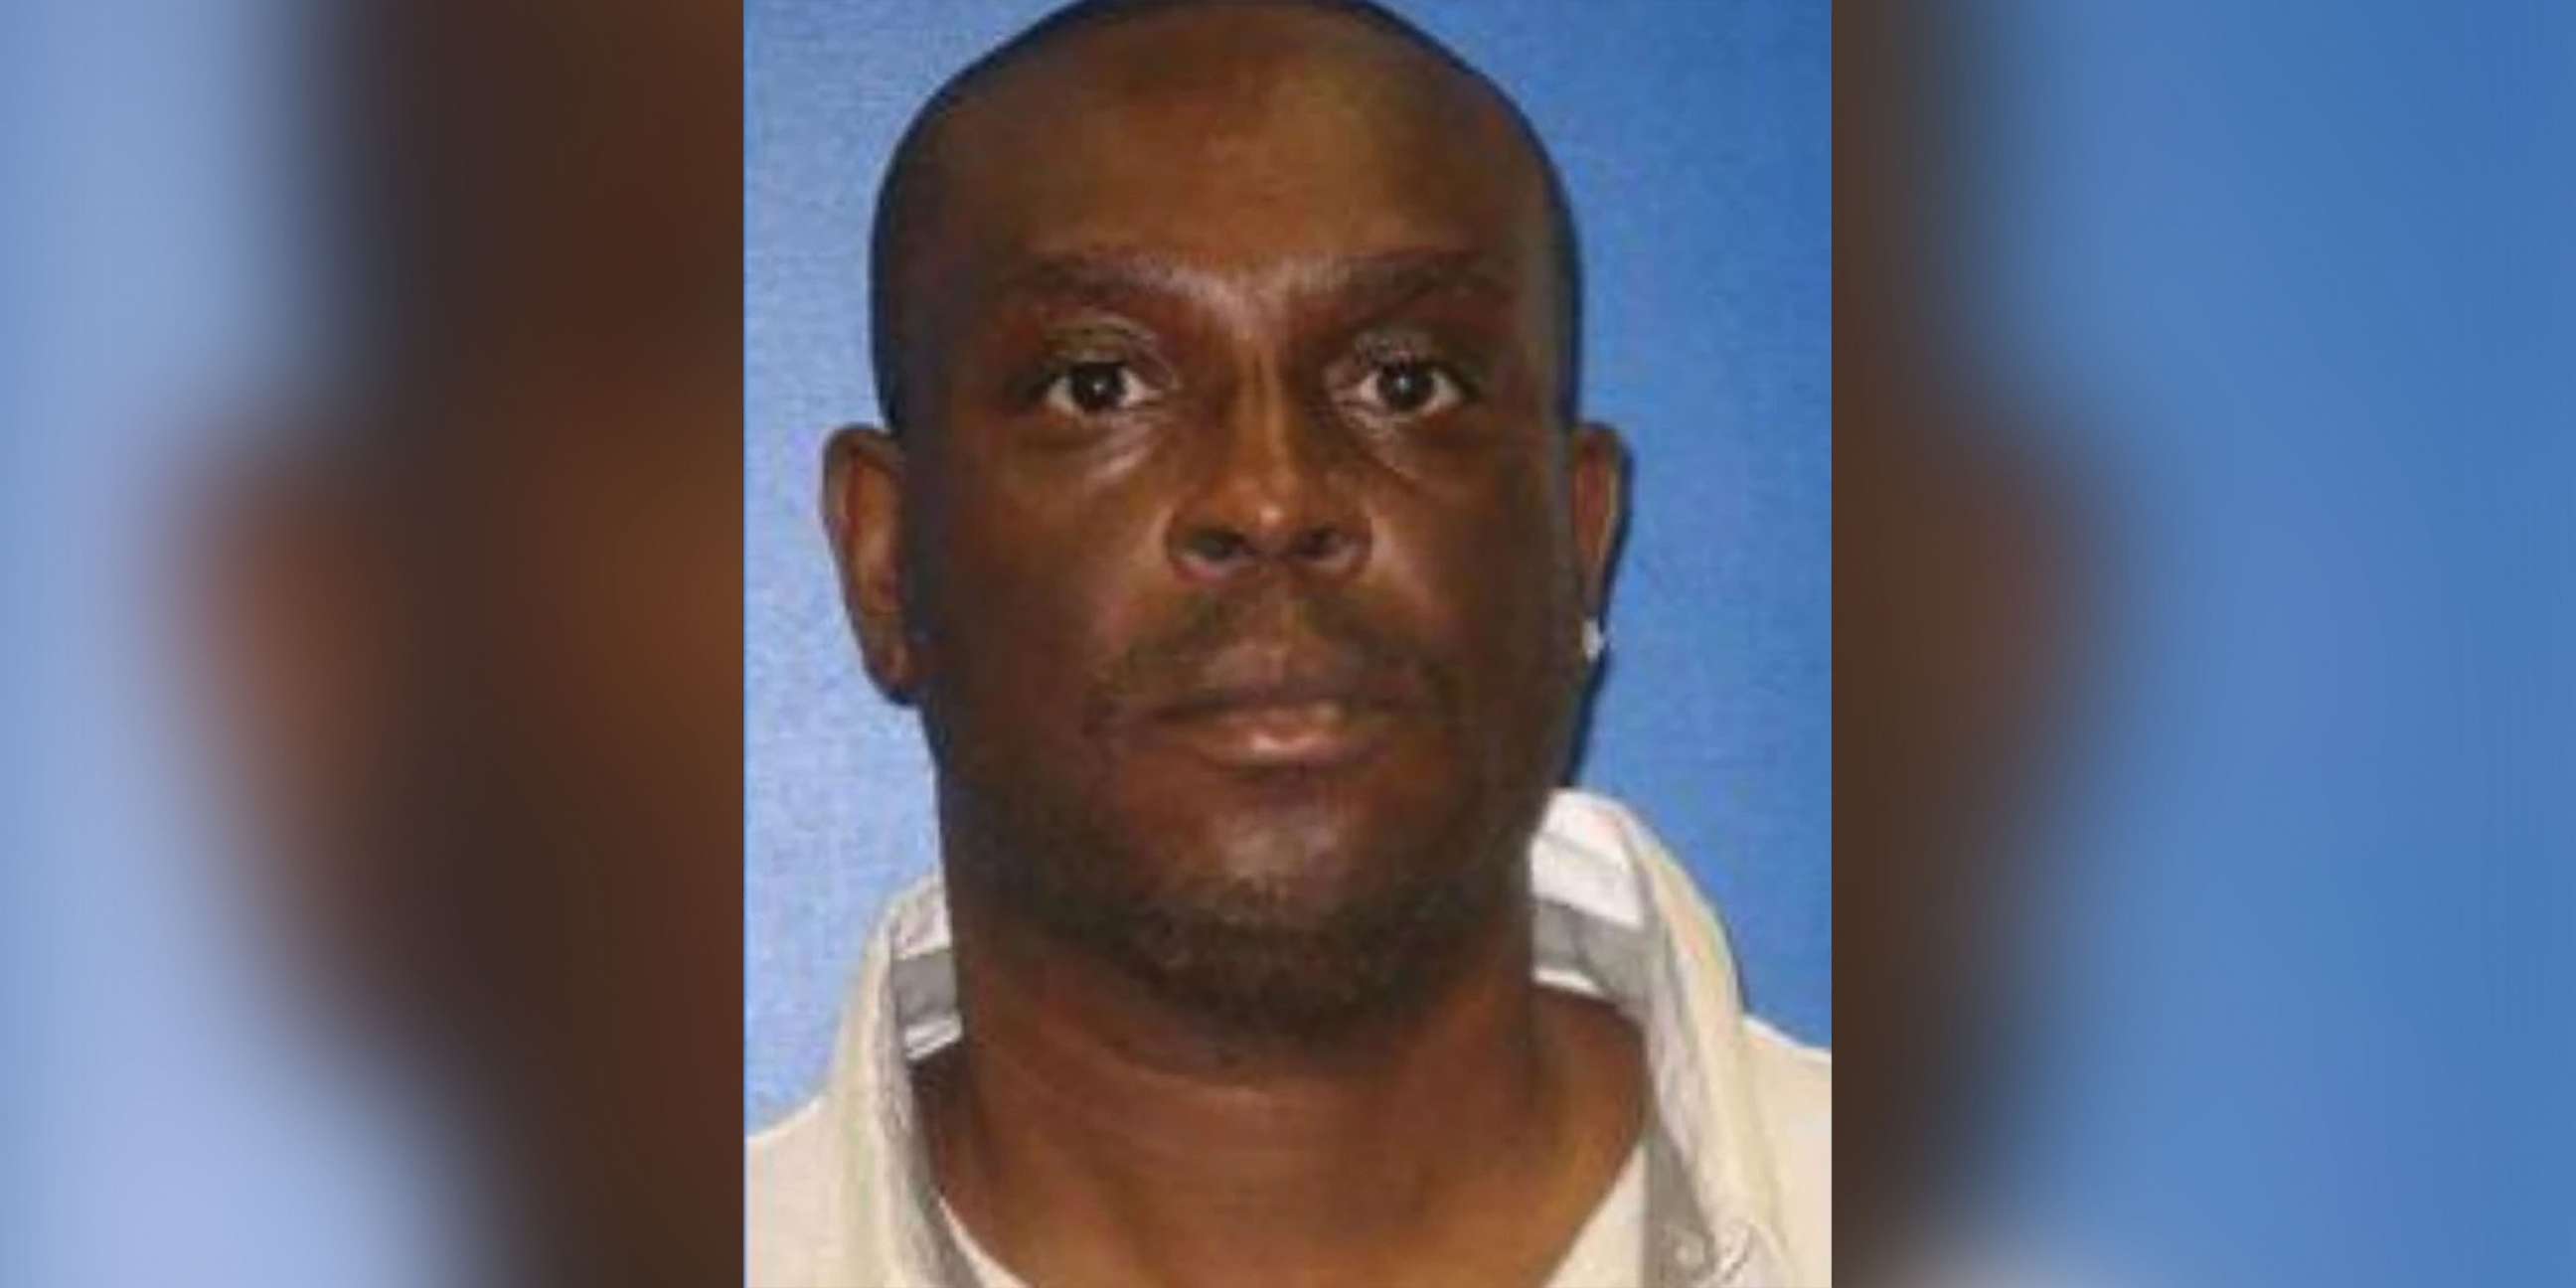 PHOTO: Fredrick Hampton, 50, is seen in a photo provided by the Jefferson County Sheriff's Office in Alabama after authorities announced they were seeking him in connection with the death of 29-year-old Paighton Houston on Dec. 21, 2019.